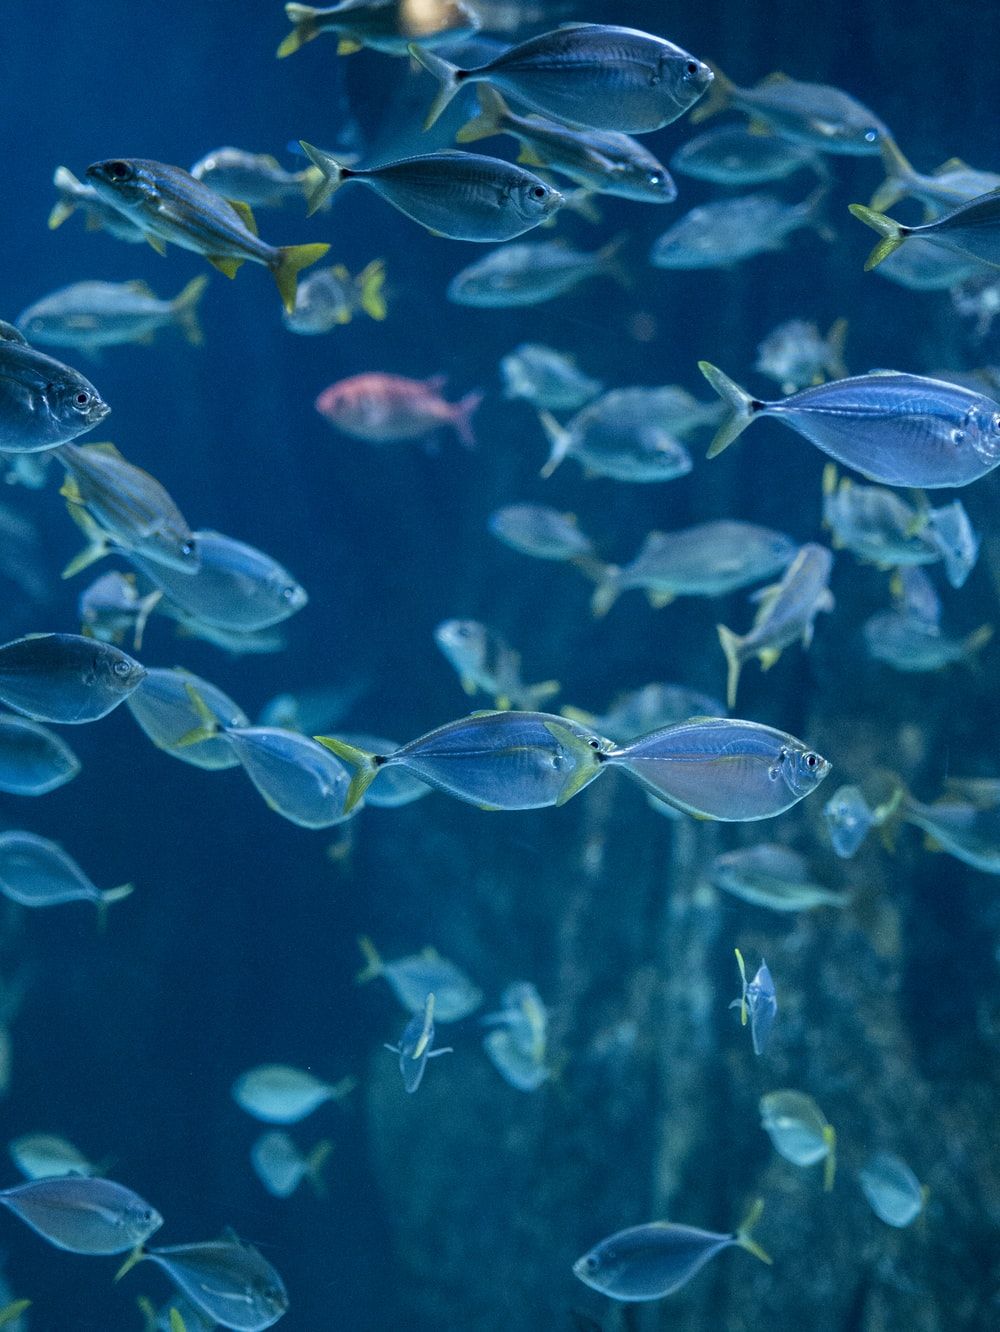 School Of Fish Picture. Download Free Image